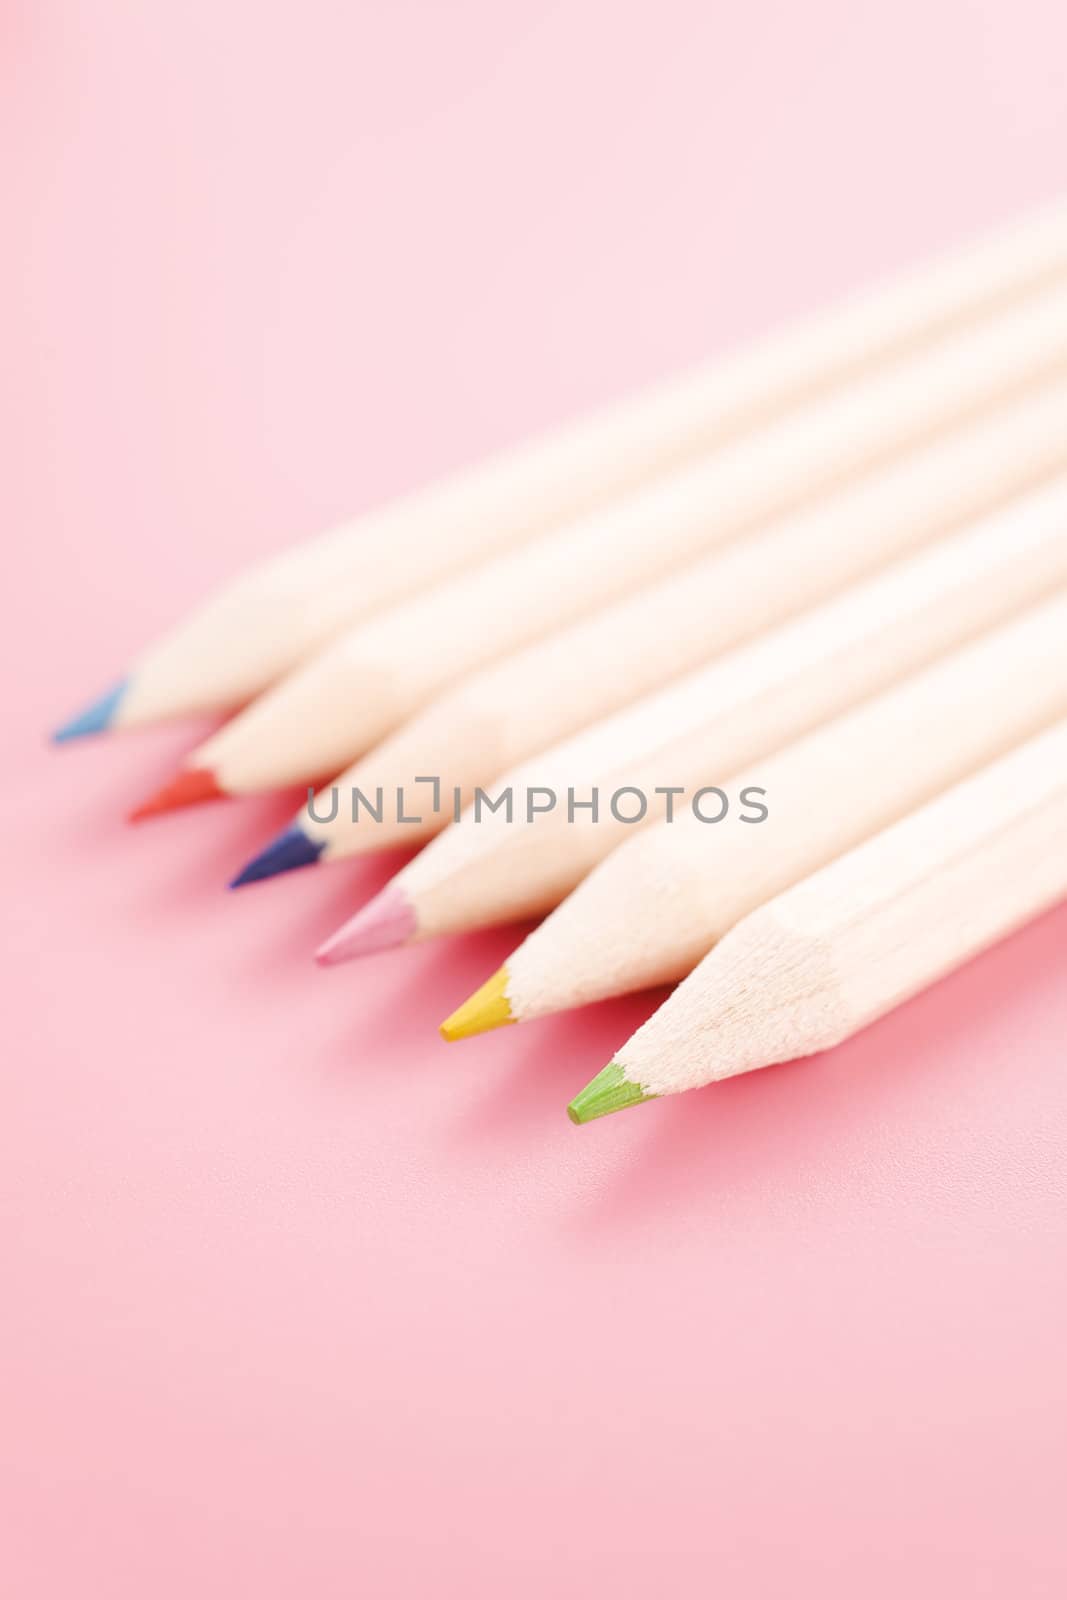 Pile of wooden pencils over a light red background